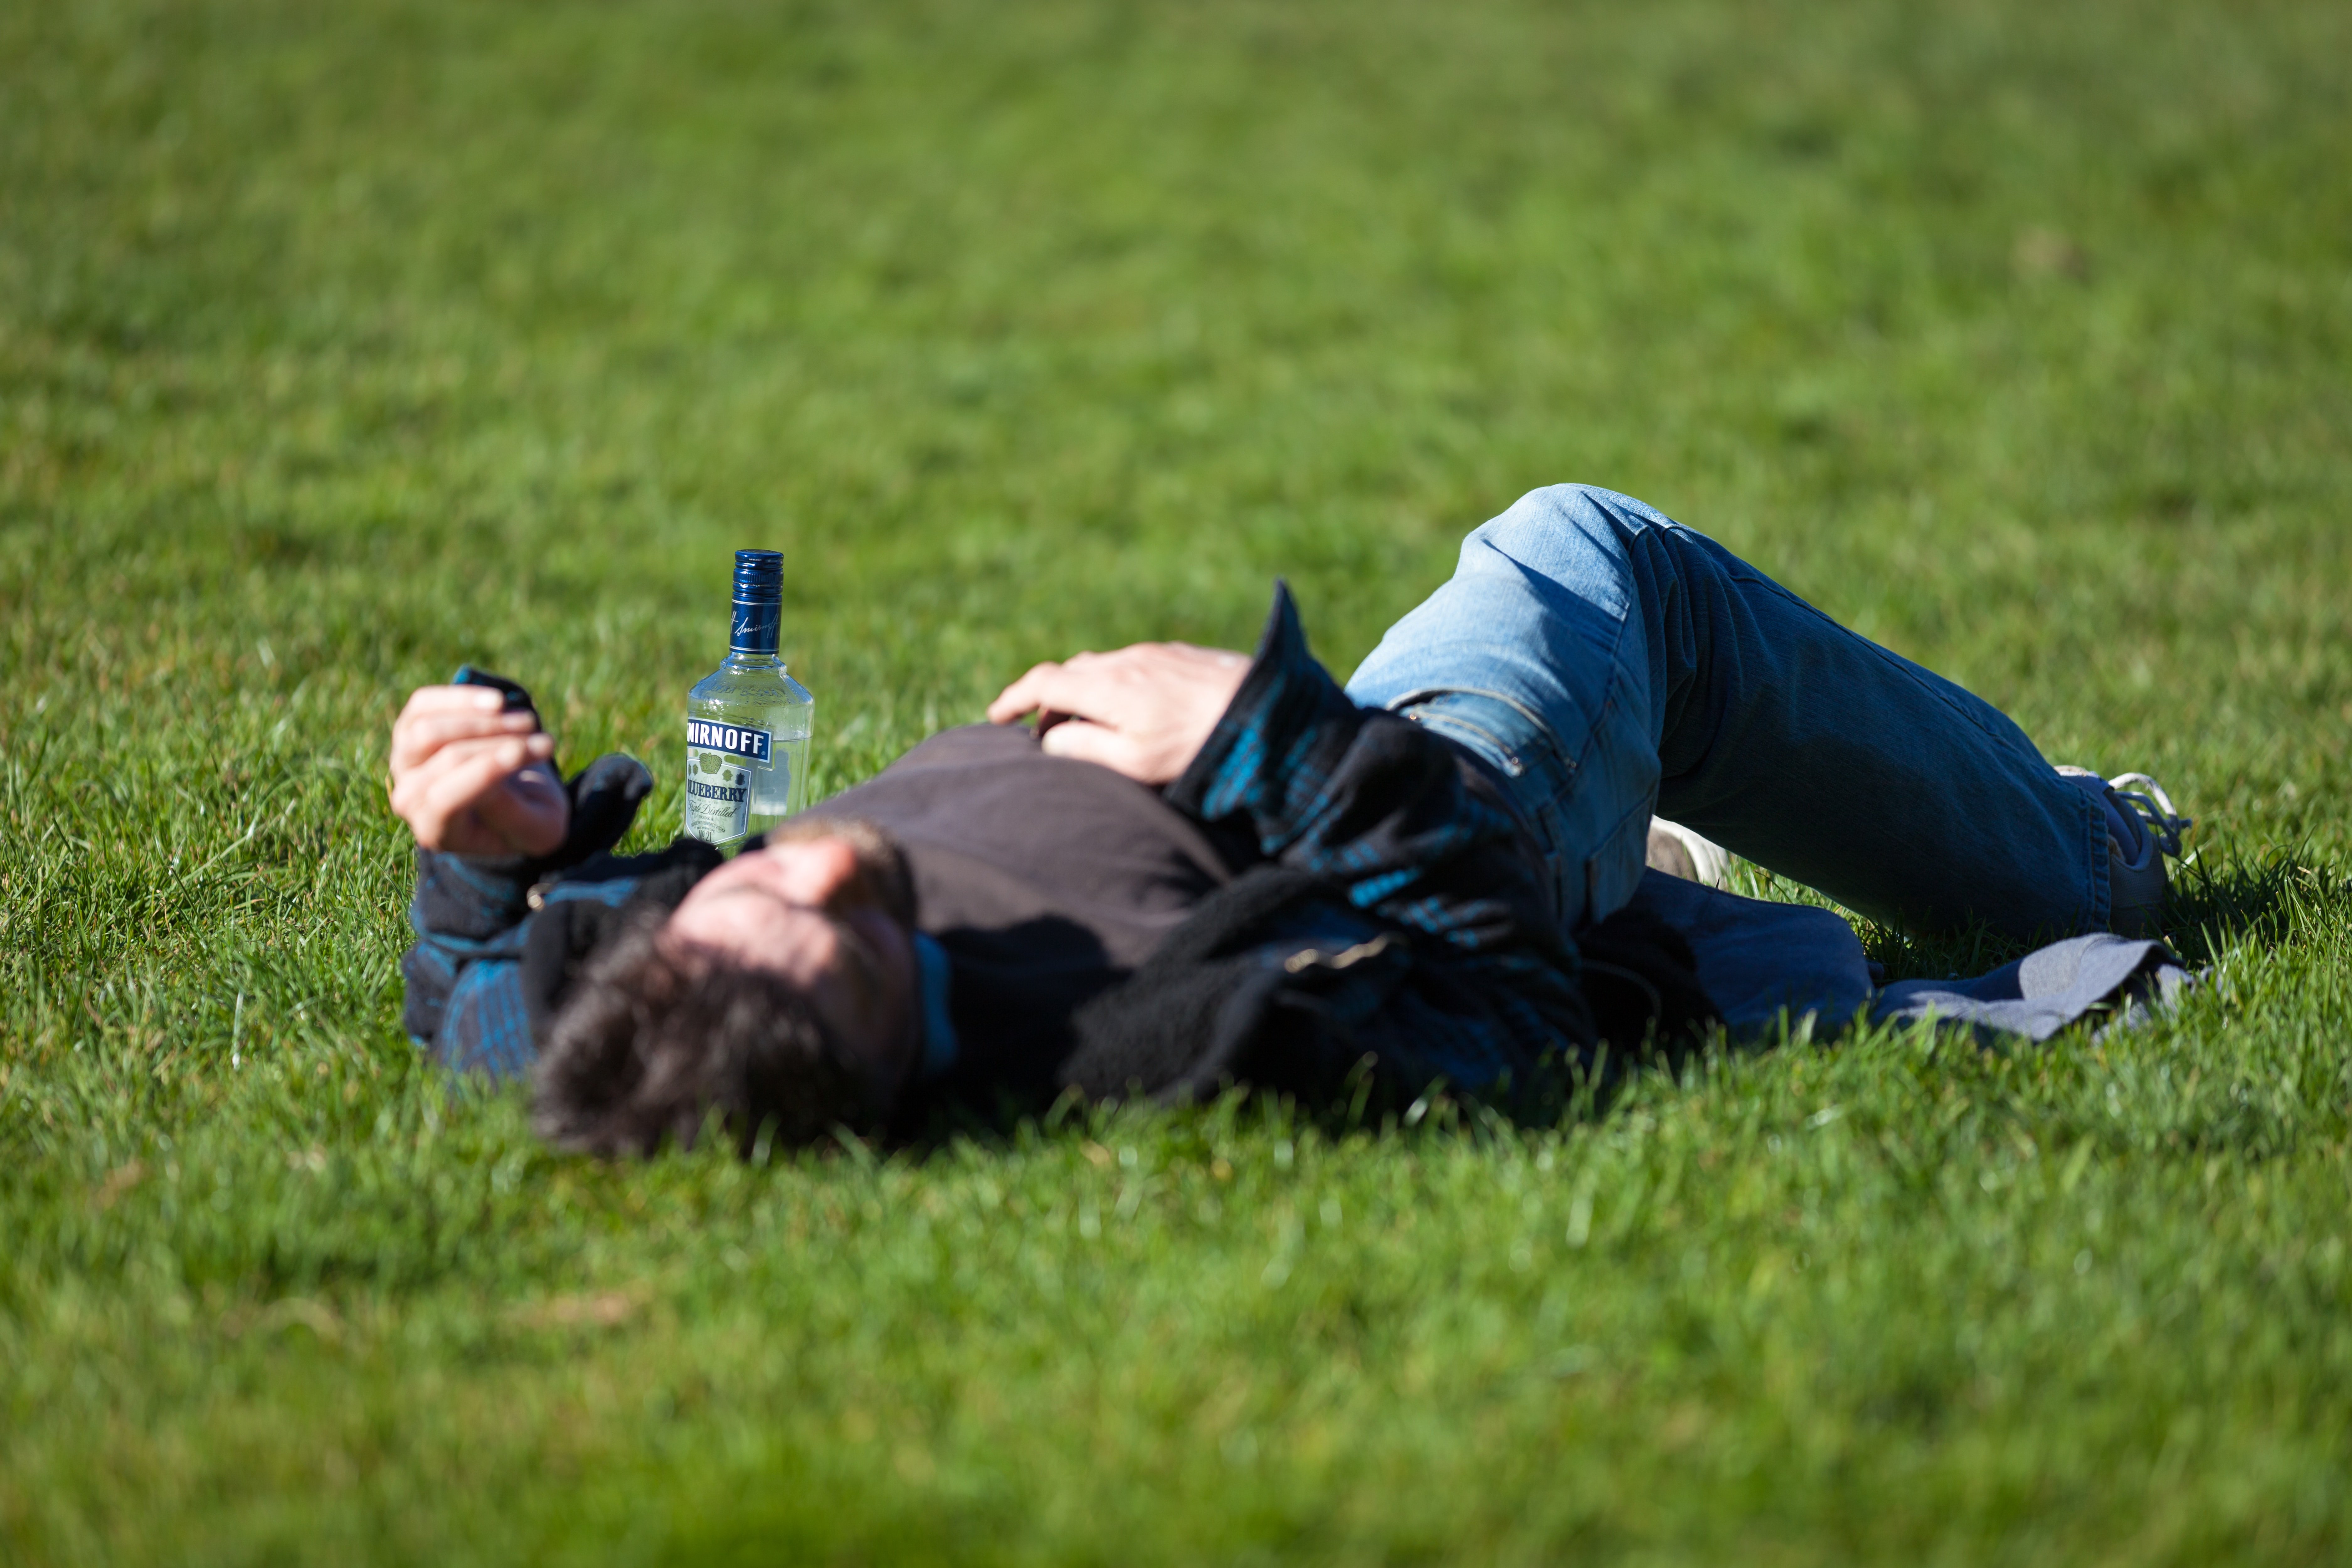 Drunk man passed out in a park. | Source: Unsplash